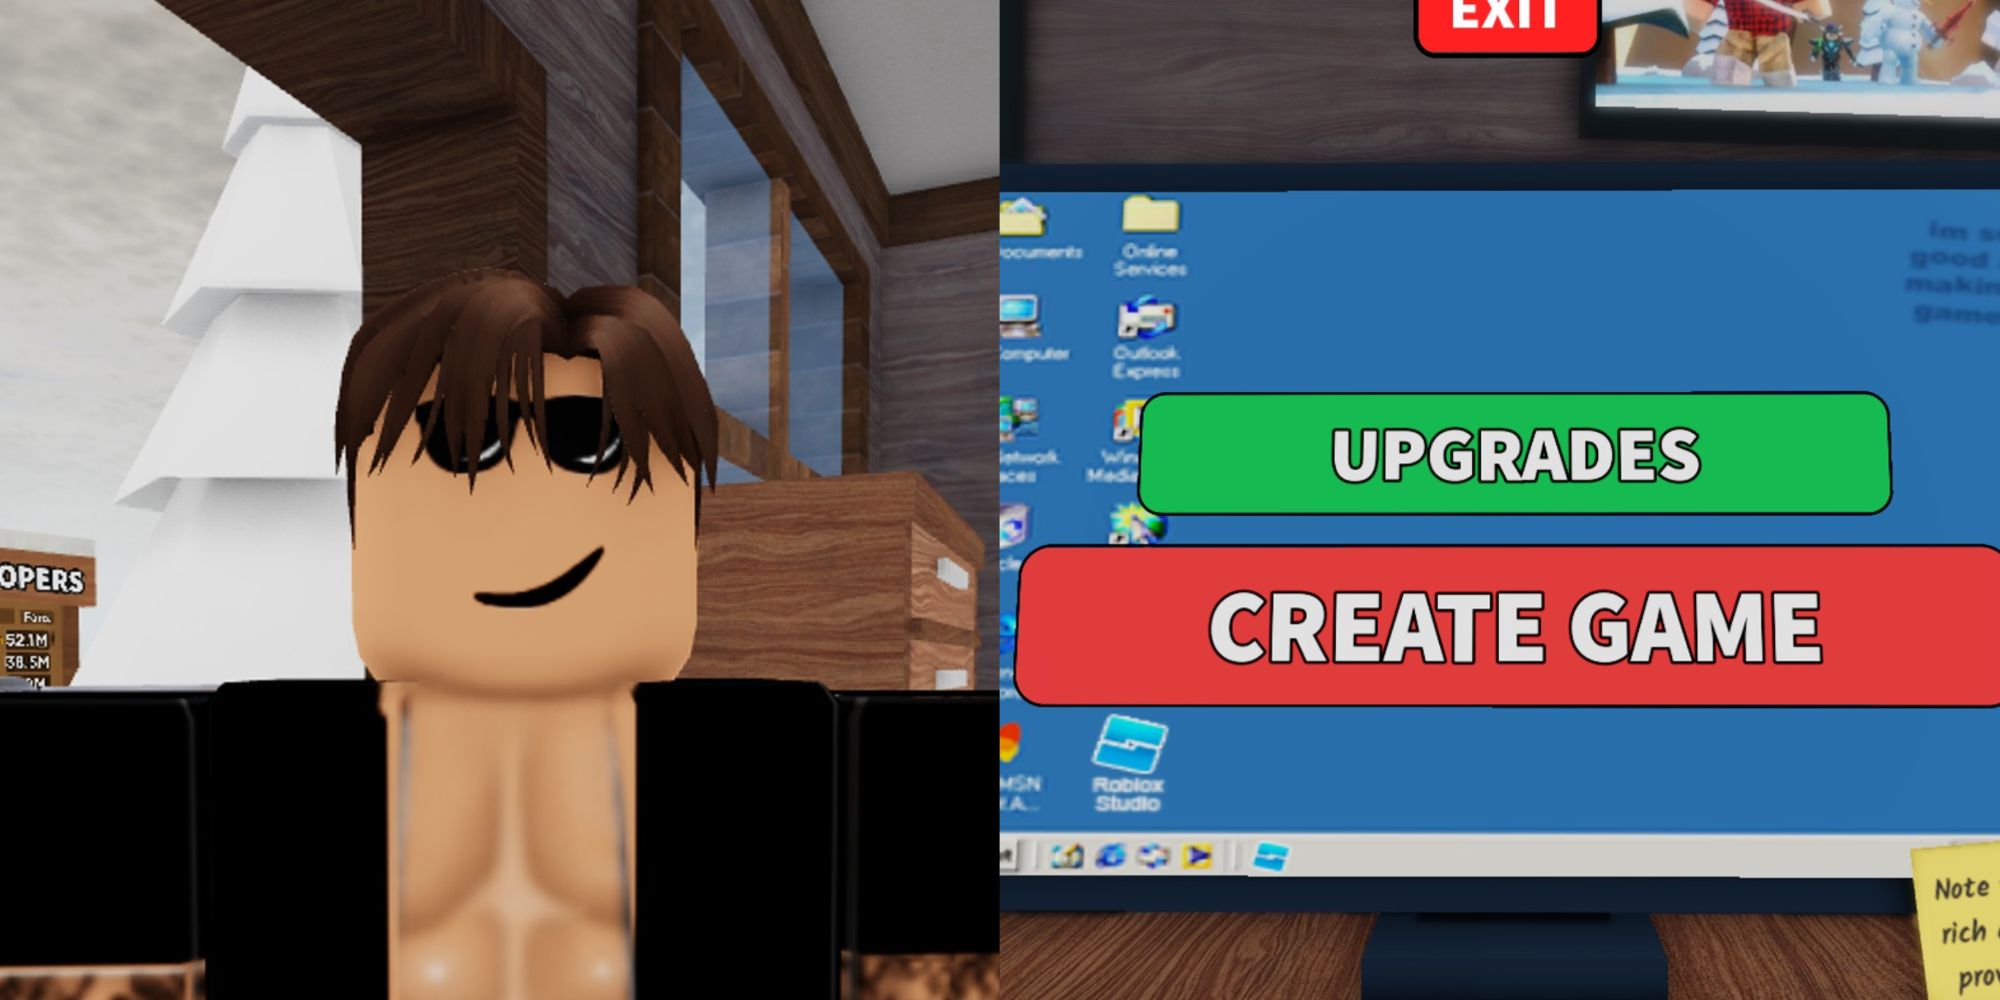 making memes in your basement at 3 AM tycoon - Roblox